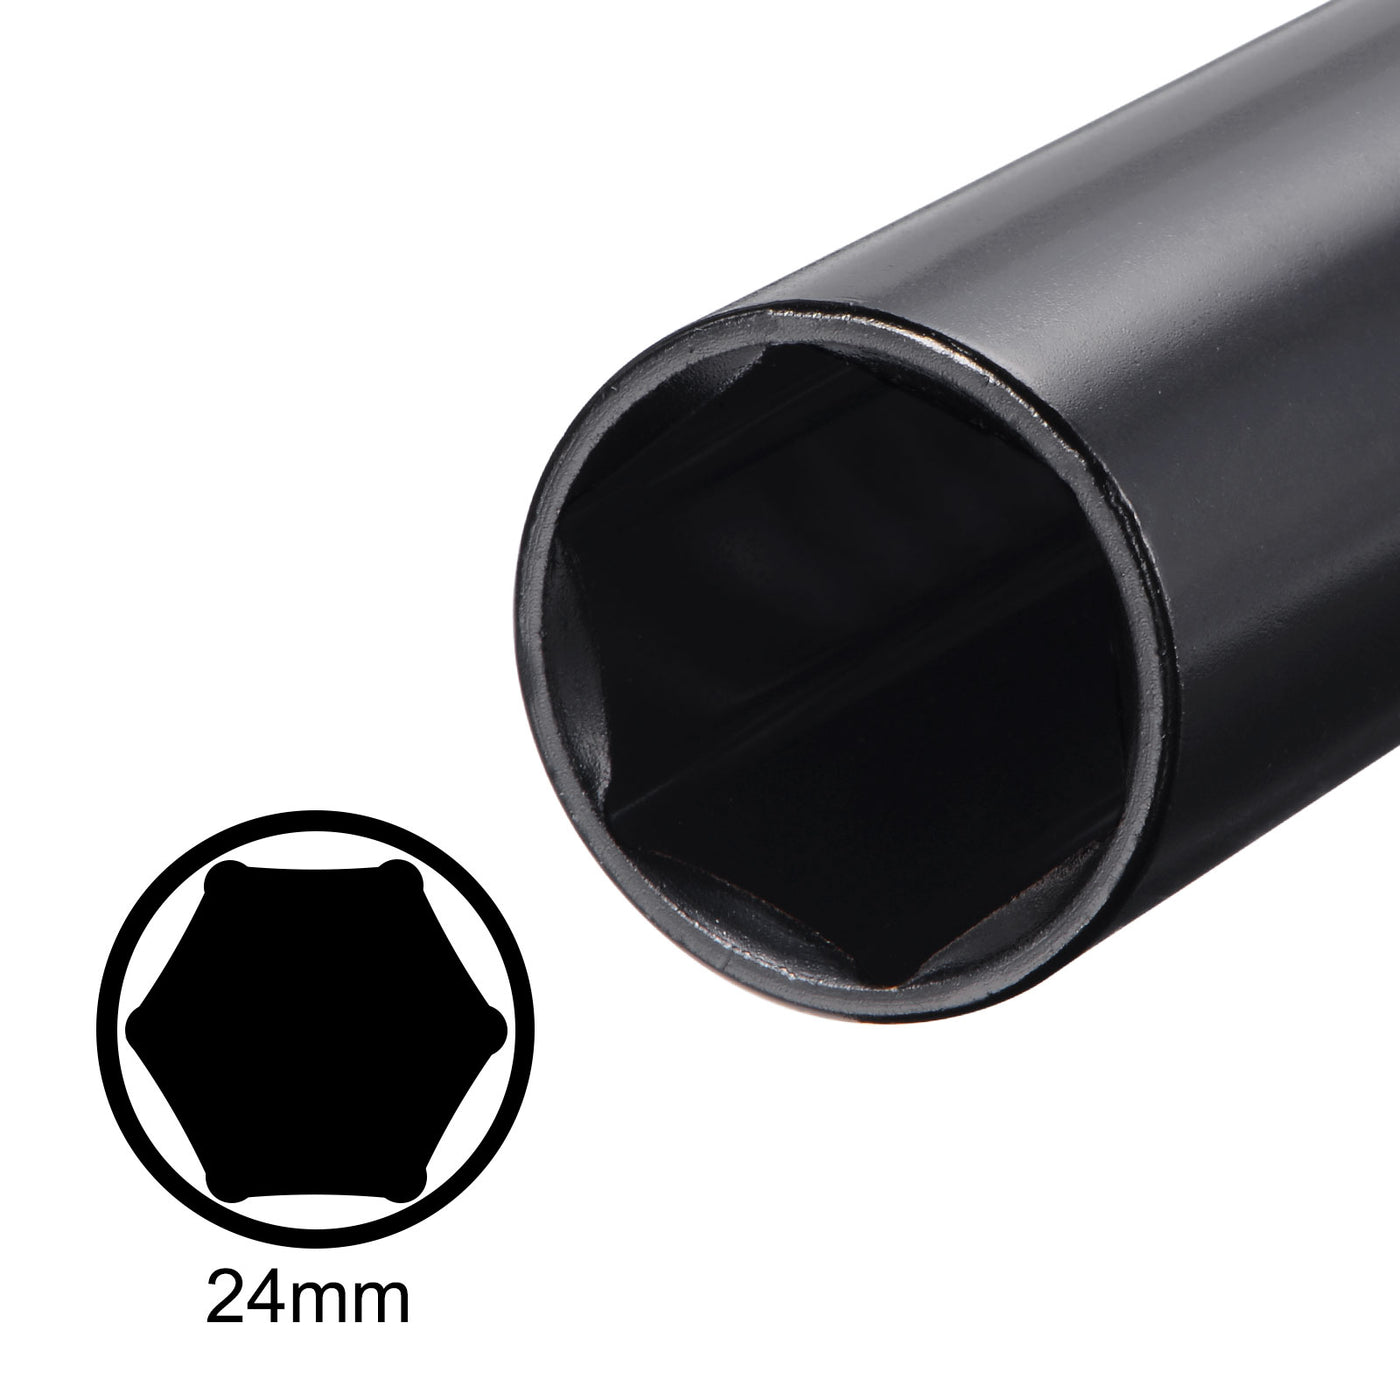 uxcell Uxcell Square Drive x Deep Impact Socket, CR-V, 6-Point Metric Sizes